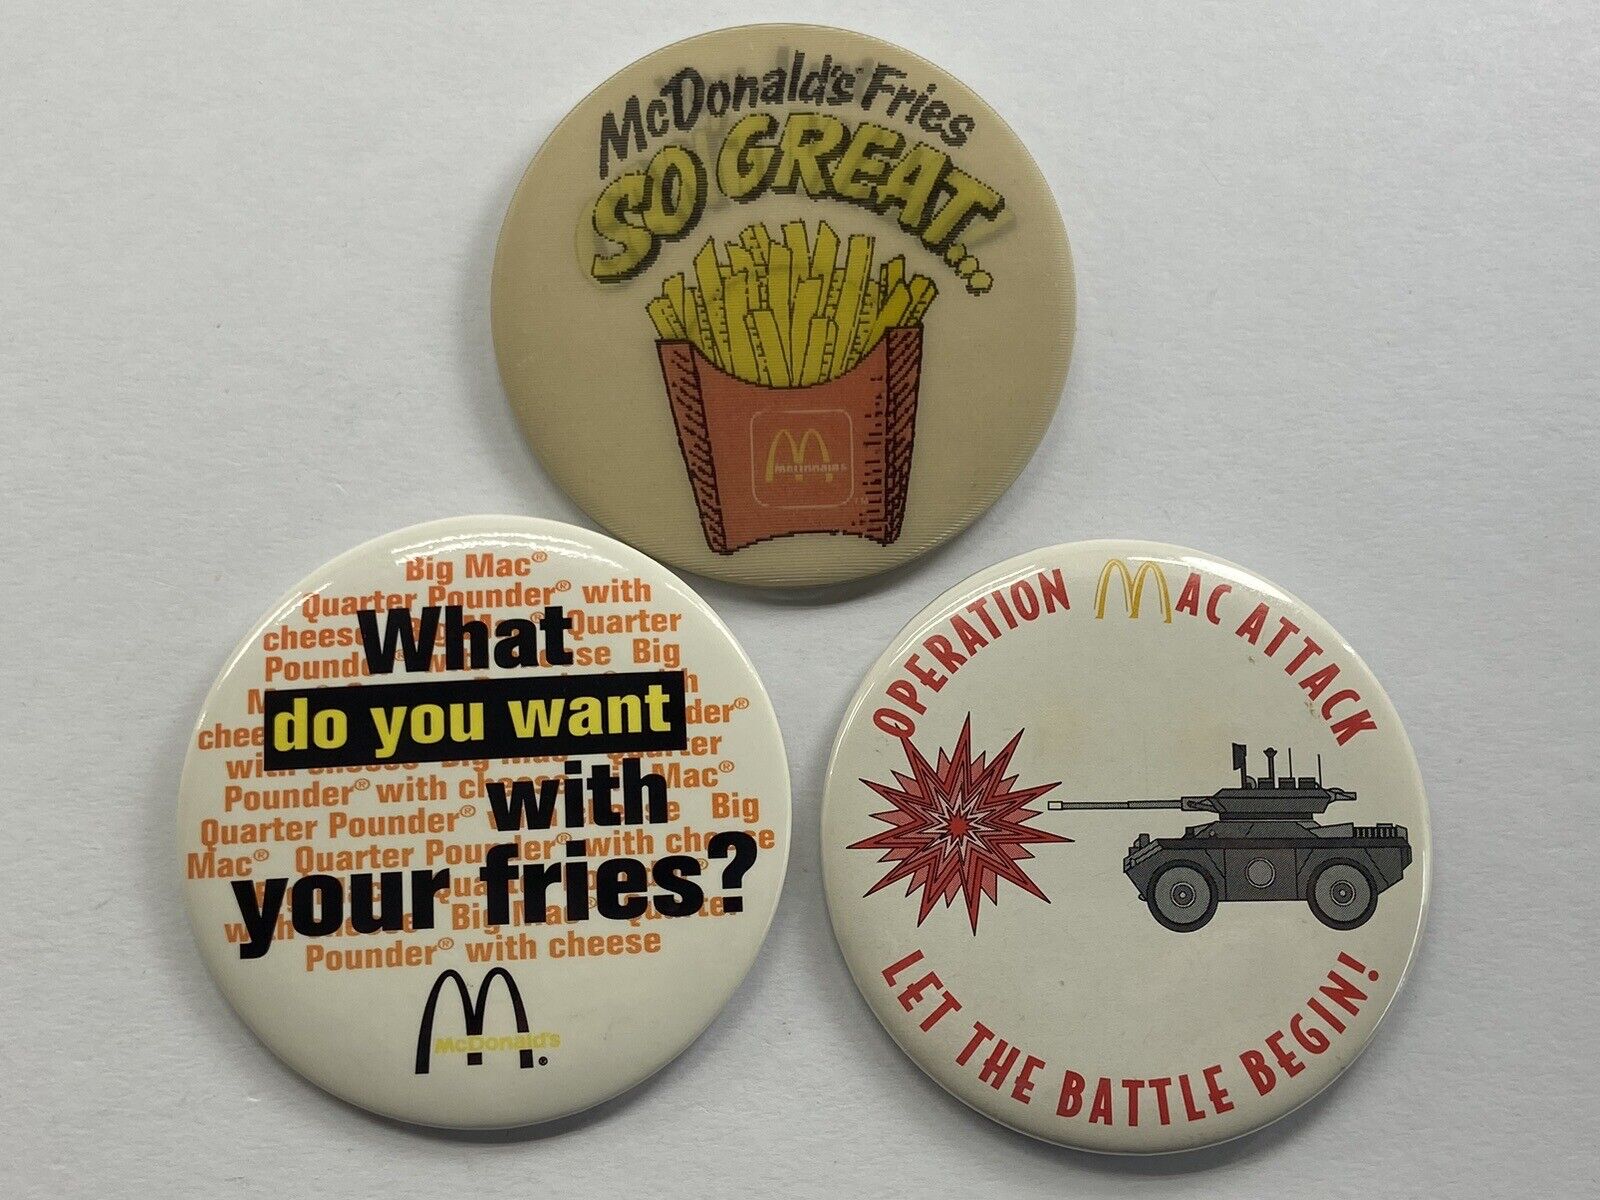 Vintage McDonalds Lenticular Fries, Operation Mac Attack Buttons Lot of 3